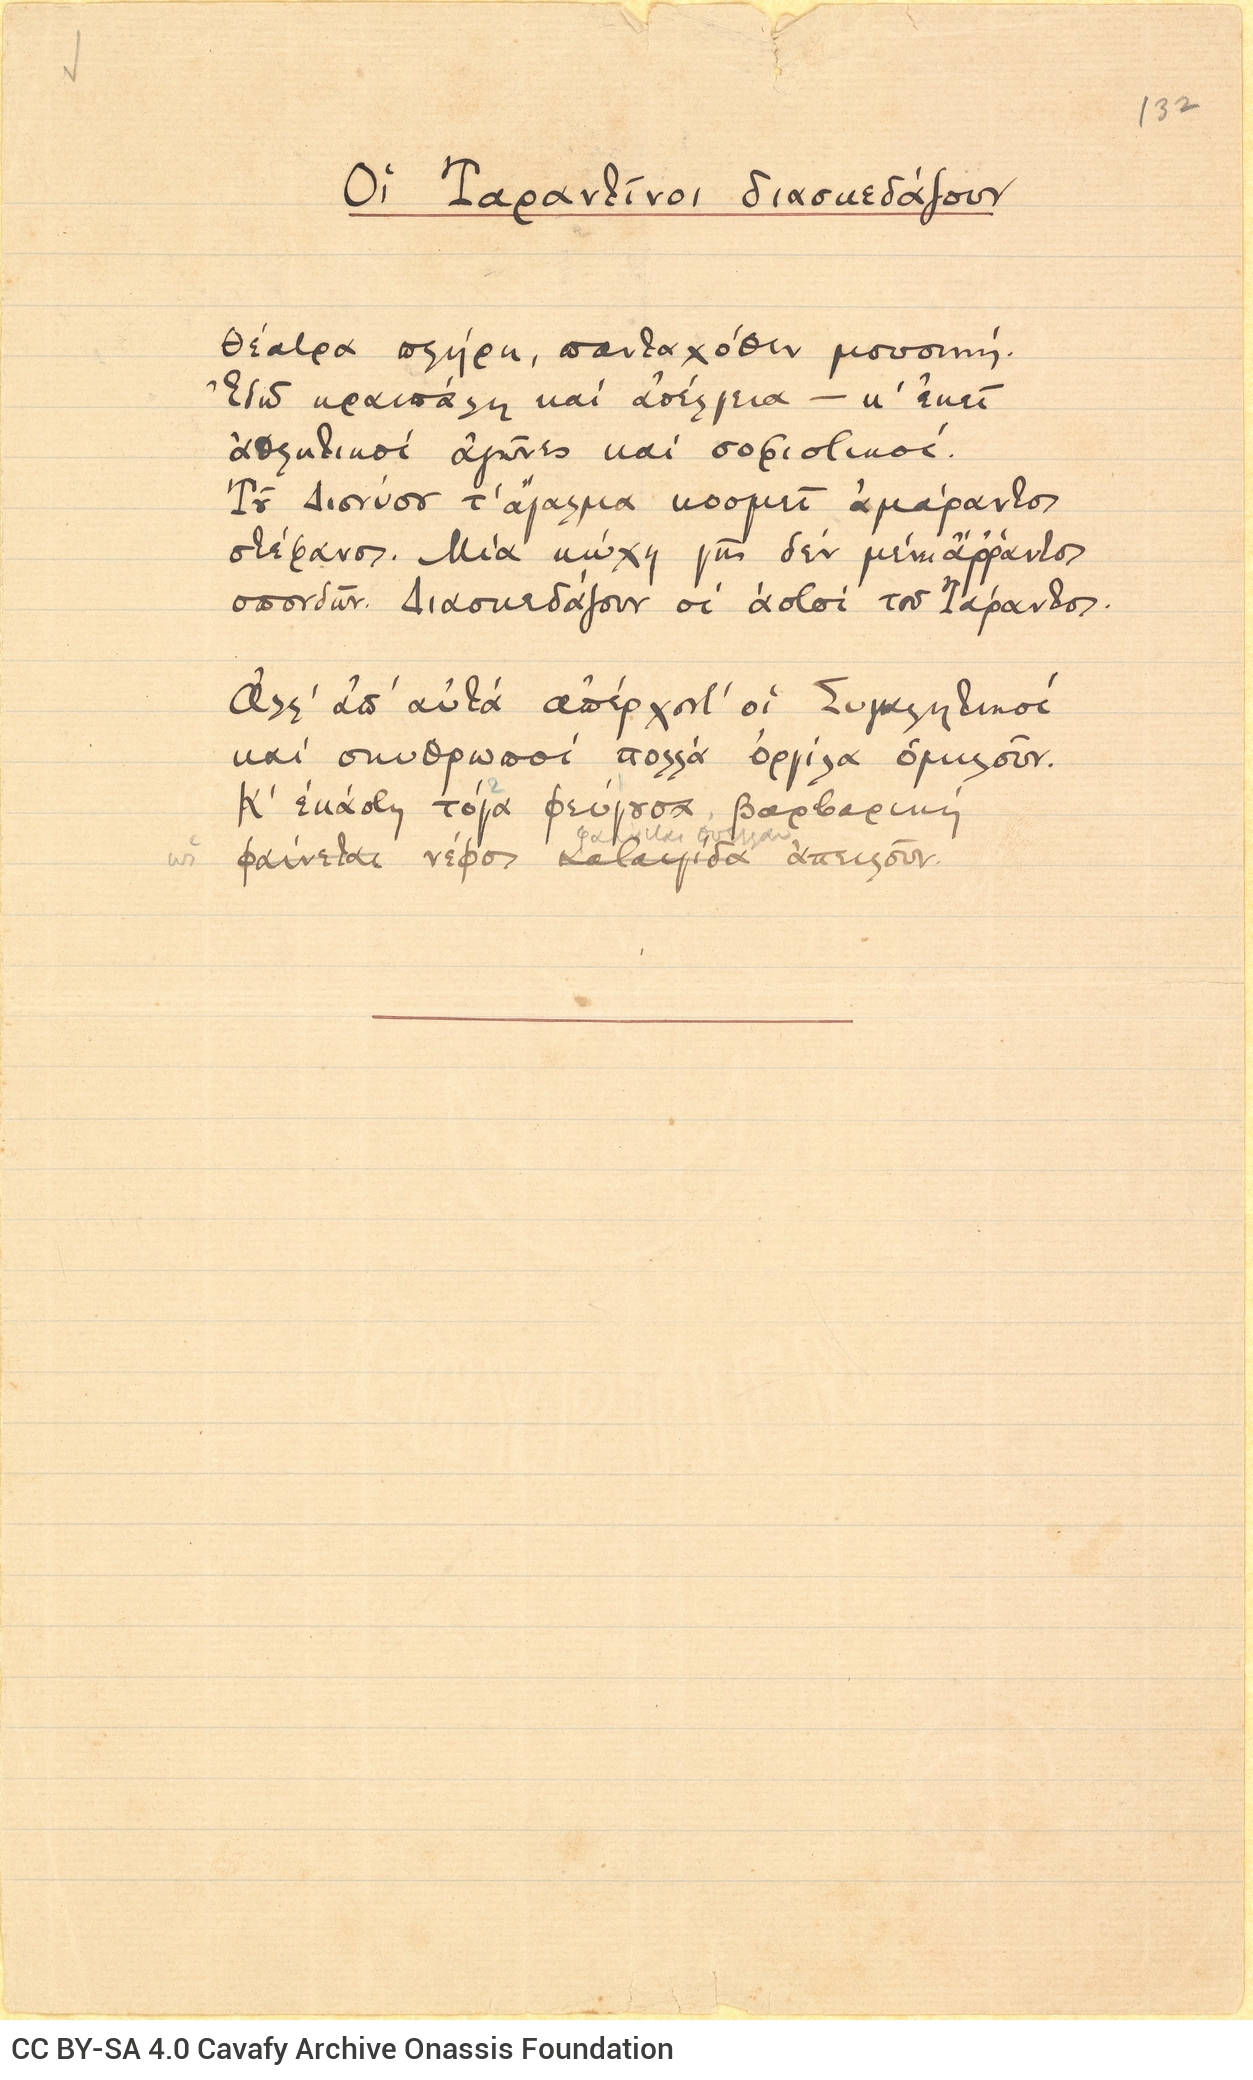 Manuscript of the poem "The Tarentines Have Their Fun", written in ink on one side of a ruled sheet. The title has been un